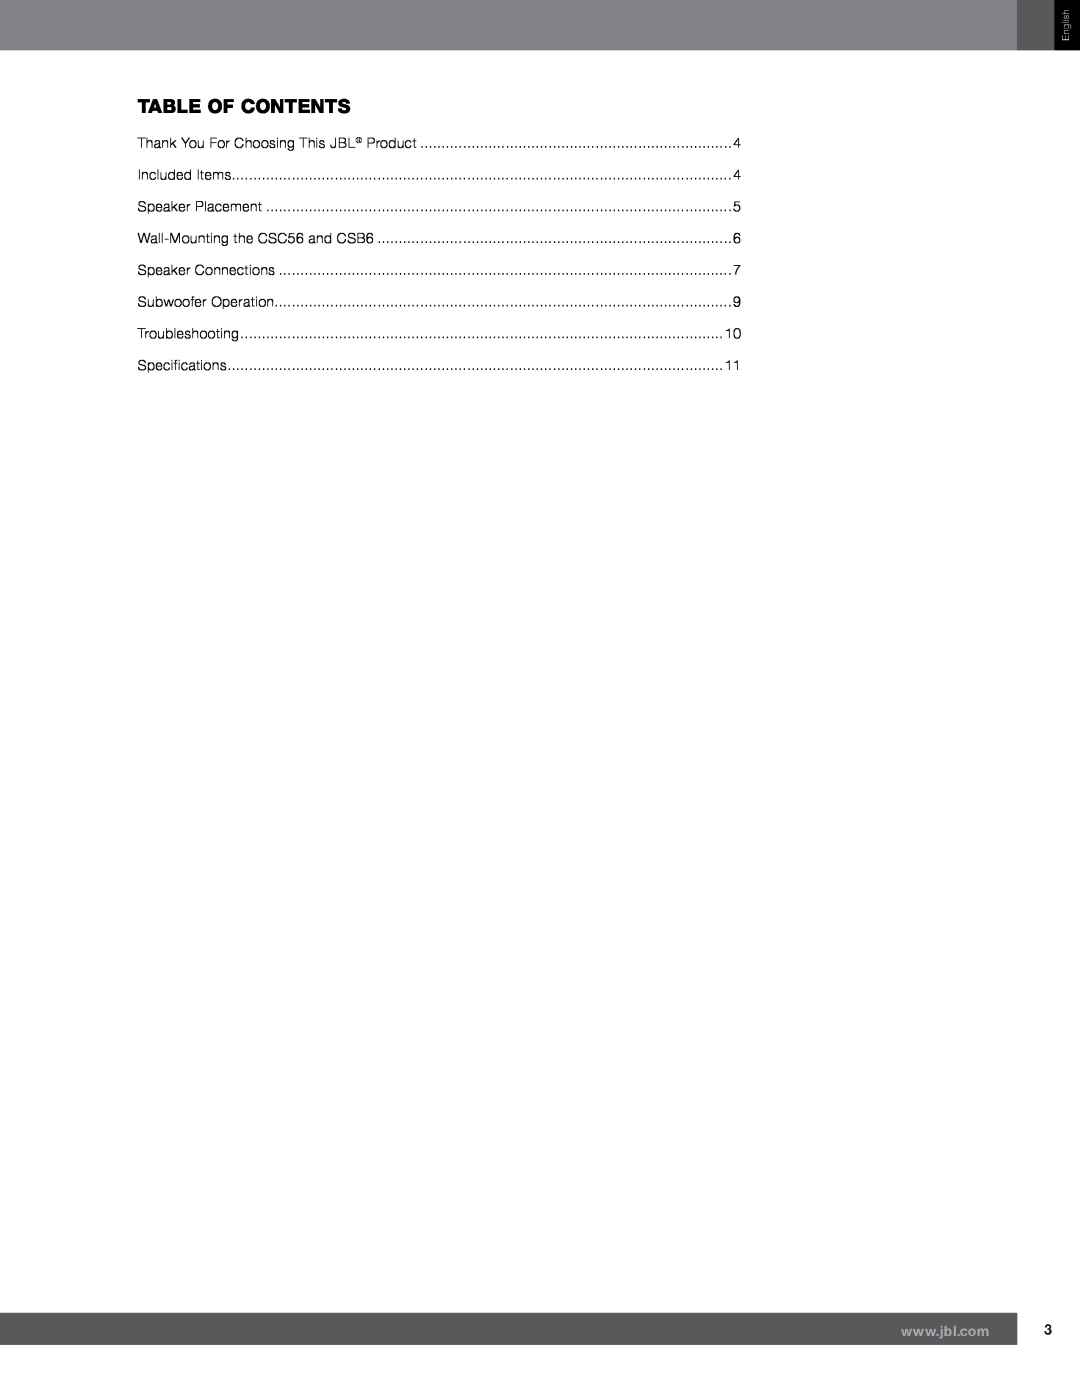 JBL CSC56, CSB6, CST56, CSS11 owner manual Table Of Contents, English 